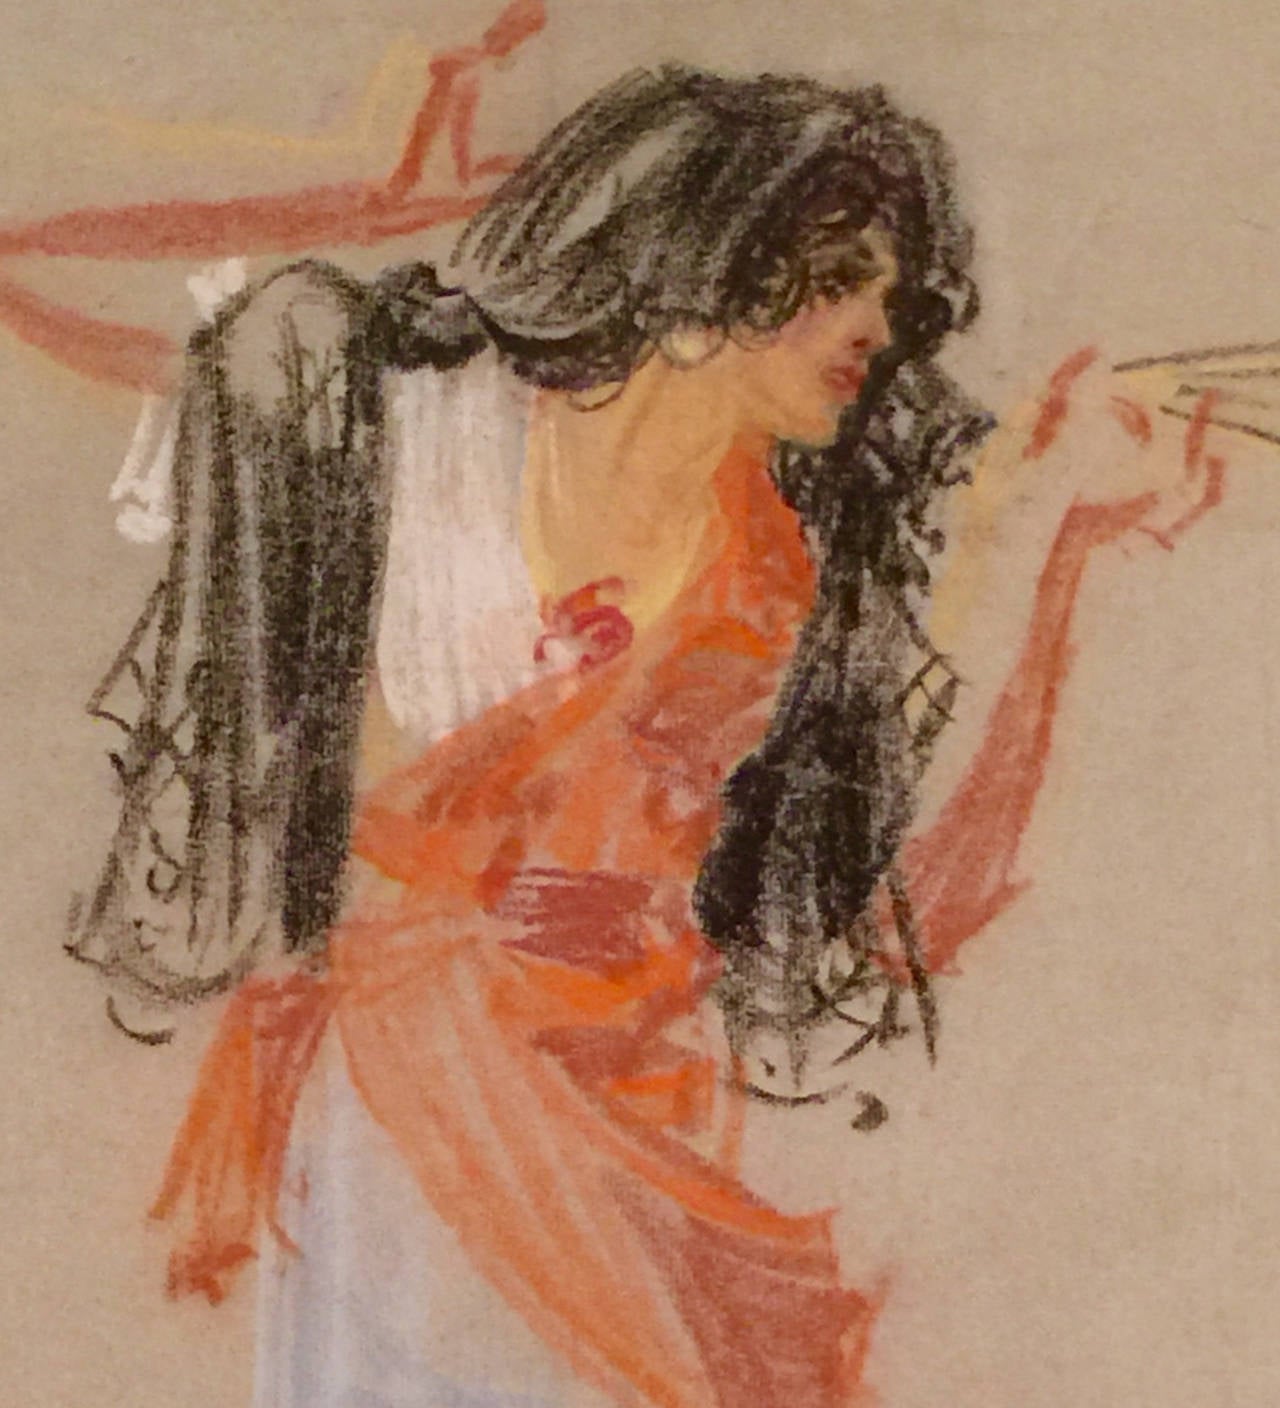 Carmen at Her Dance from the Opera - Art by Henry Ives Cobb, Jr.